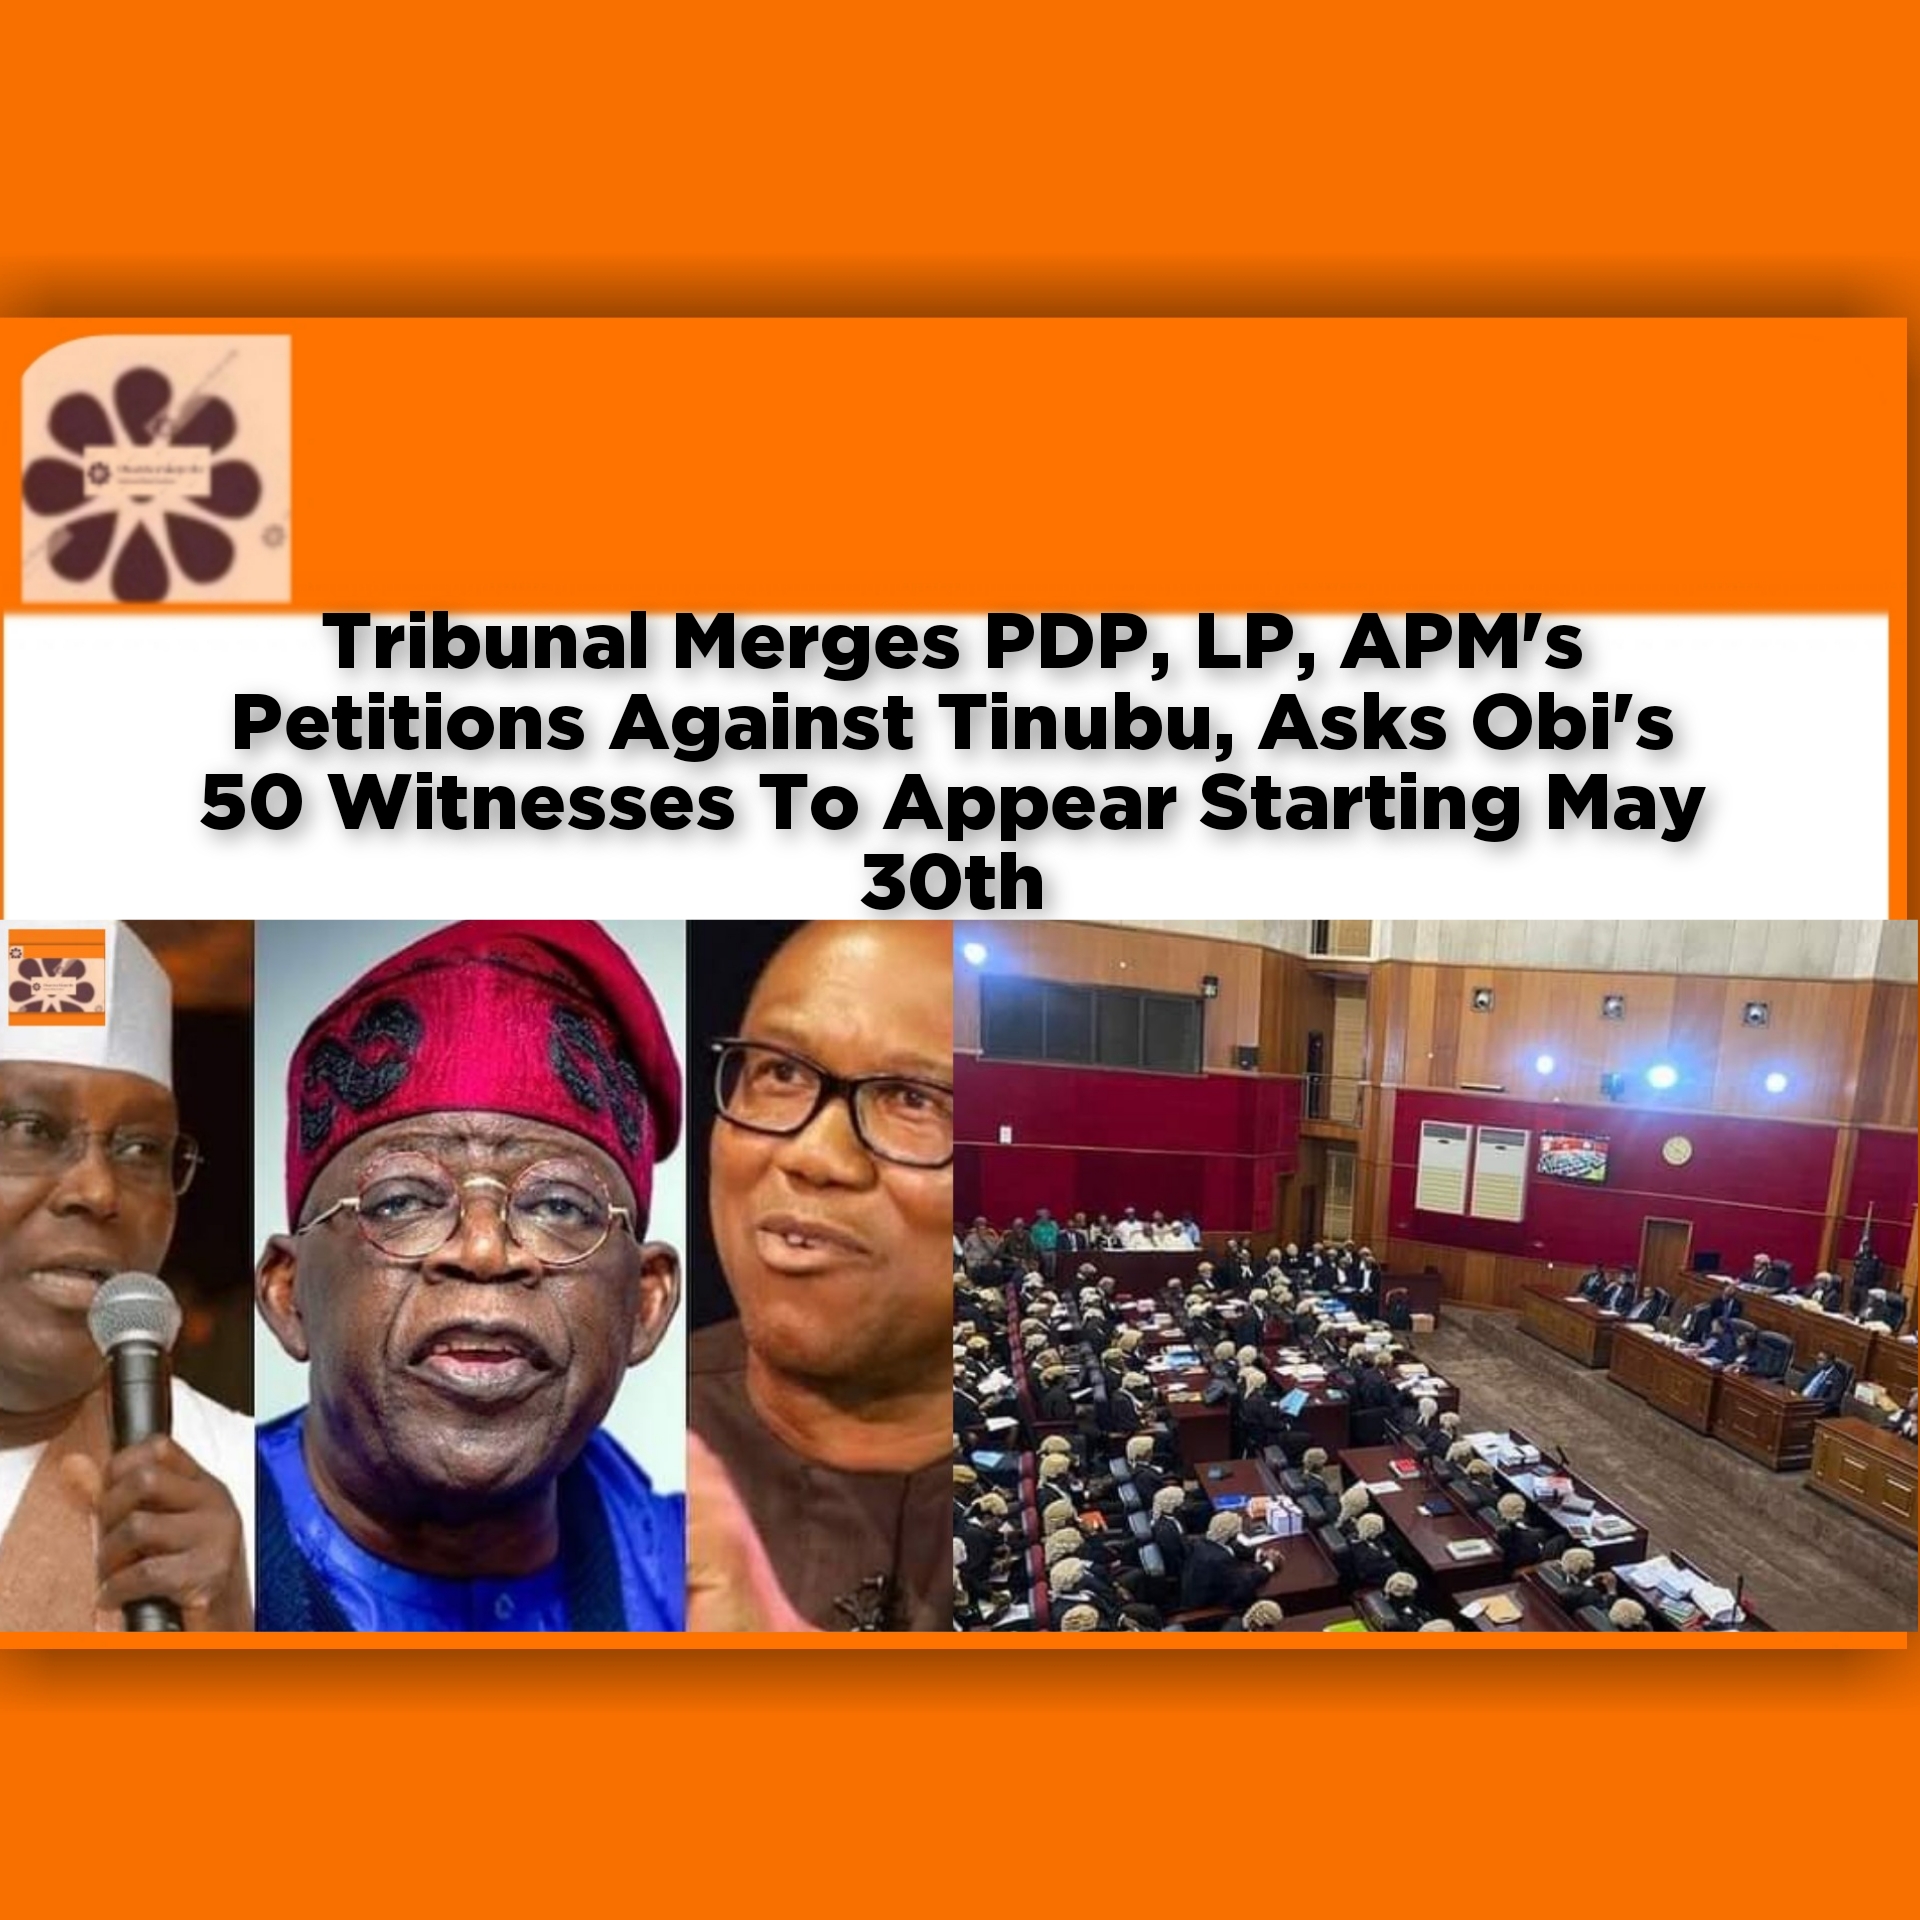 Tribunal Merges PDP, LP, APM's Petitions Against Tinubu, Asks Obi's 50 Witnesses To Appear Starting May 30th ~ OsazuwaAkonedo Issues